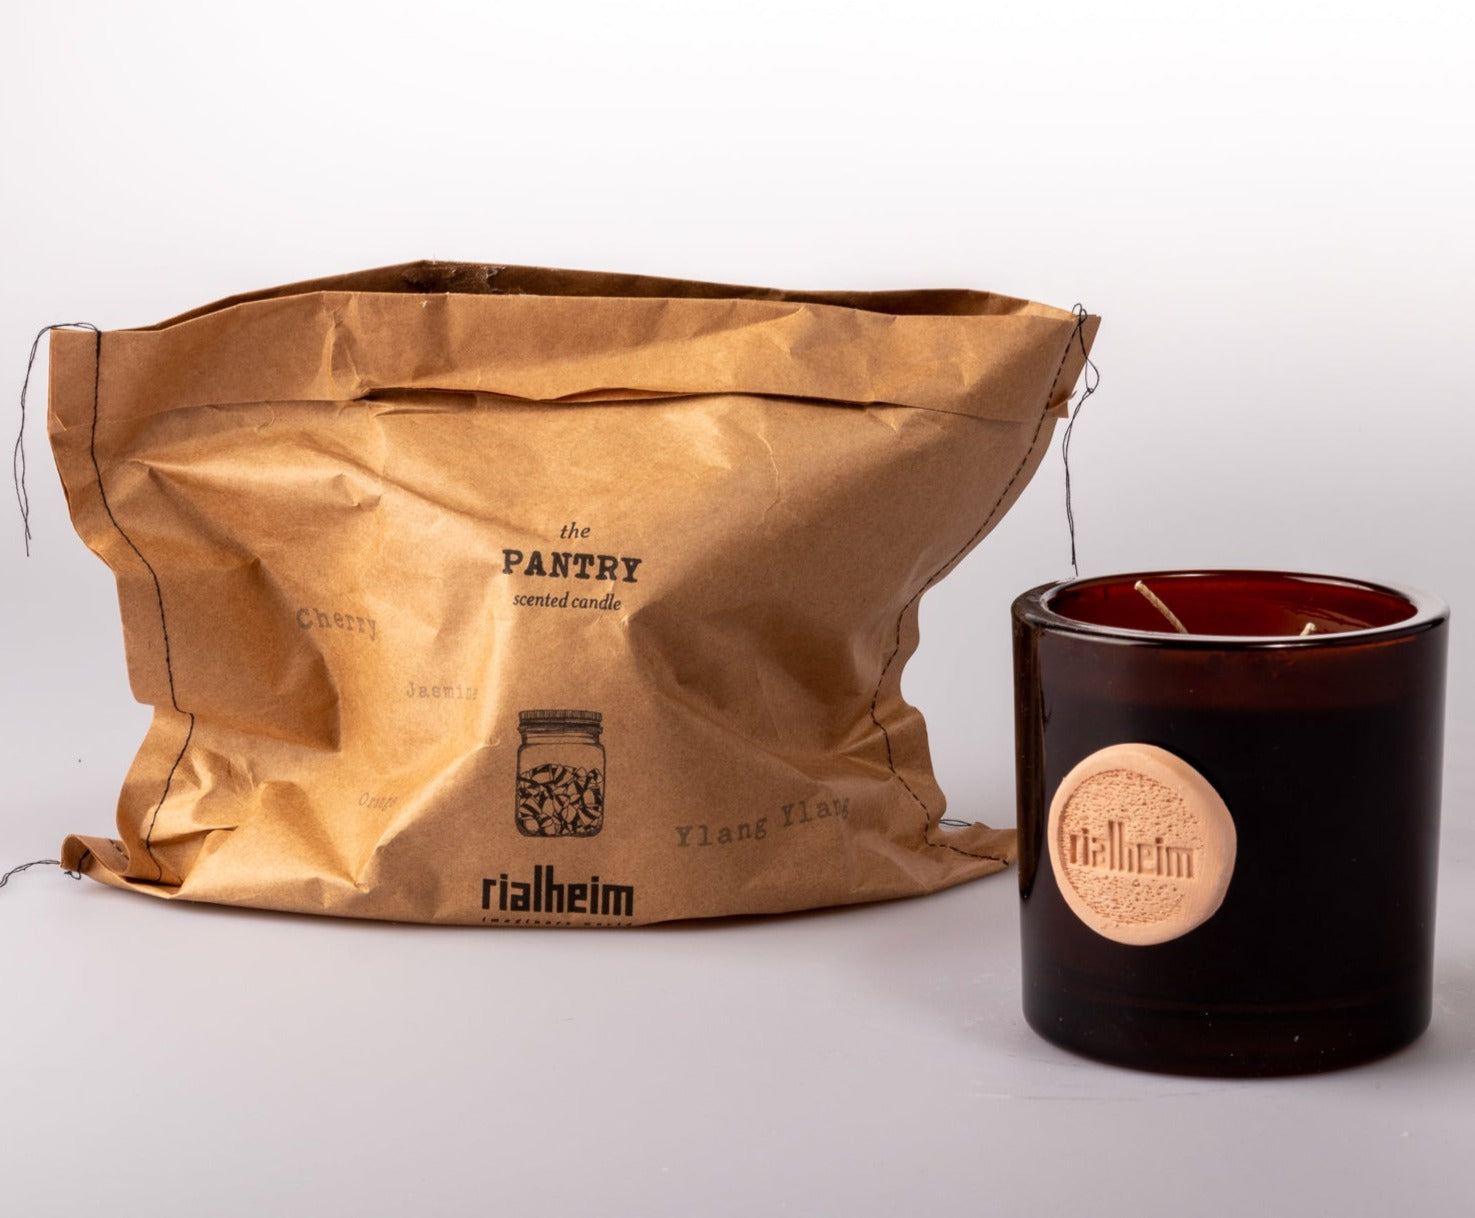 (290g) The Pantry Scented Candle - Rialheim 